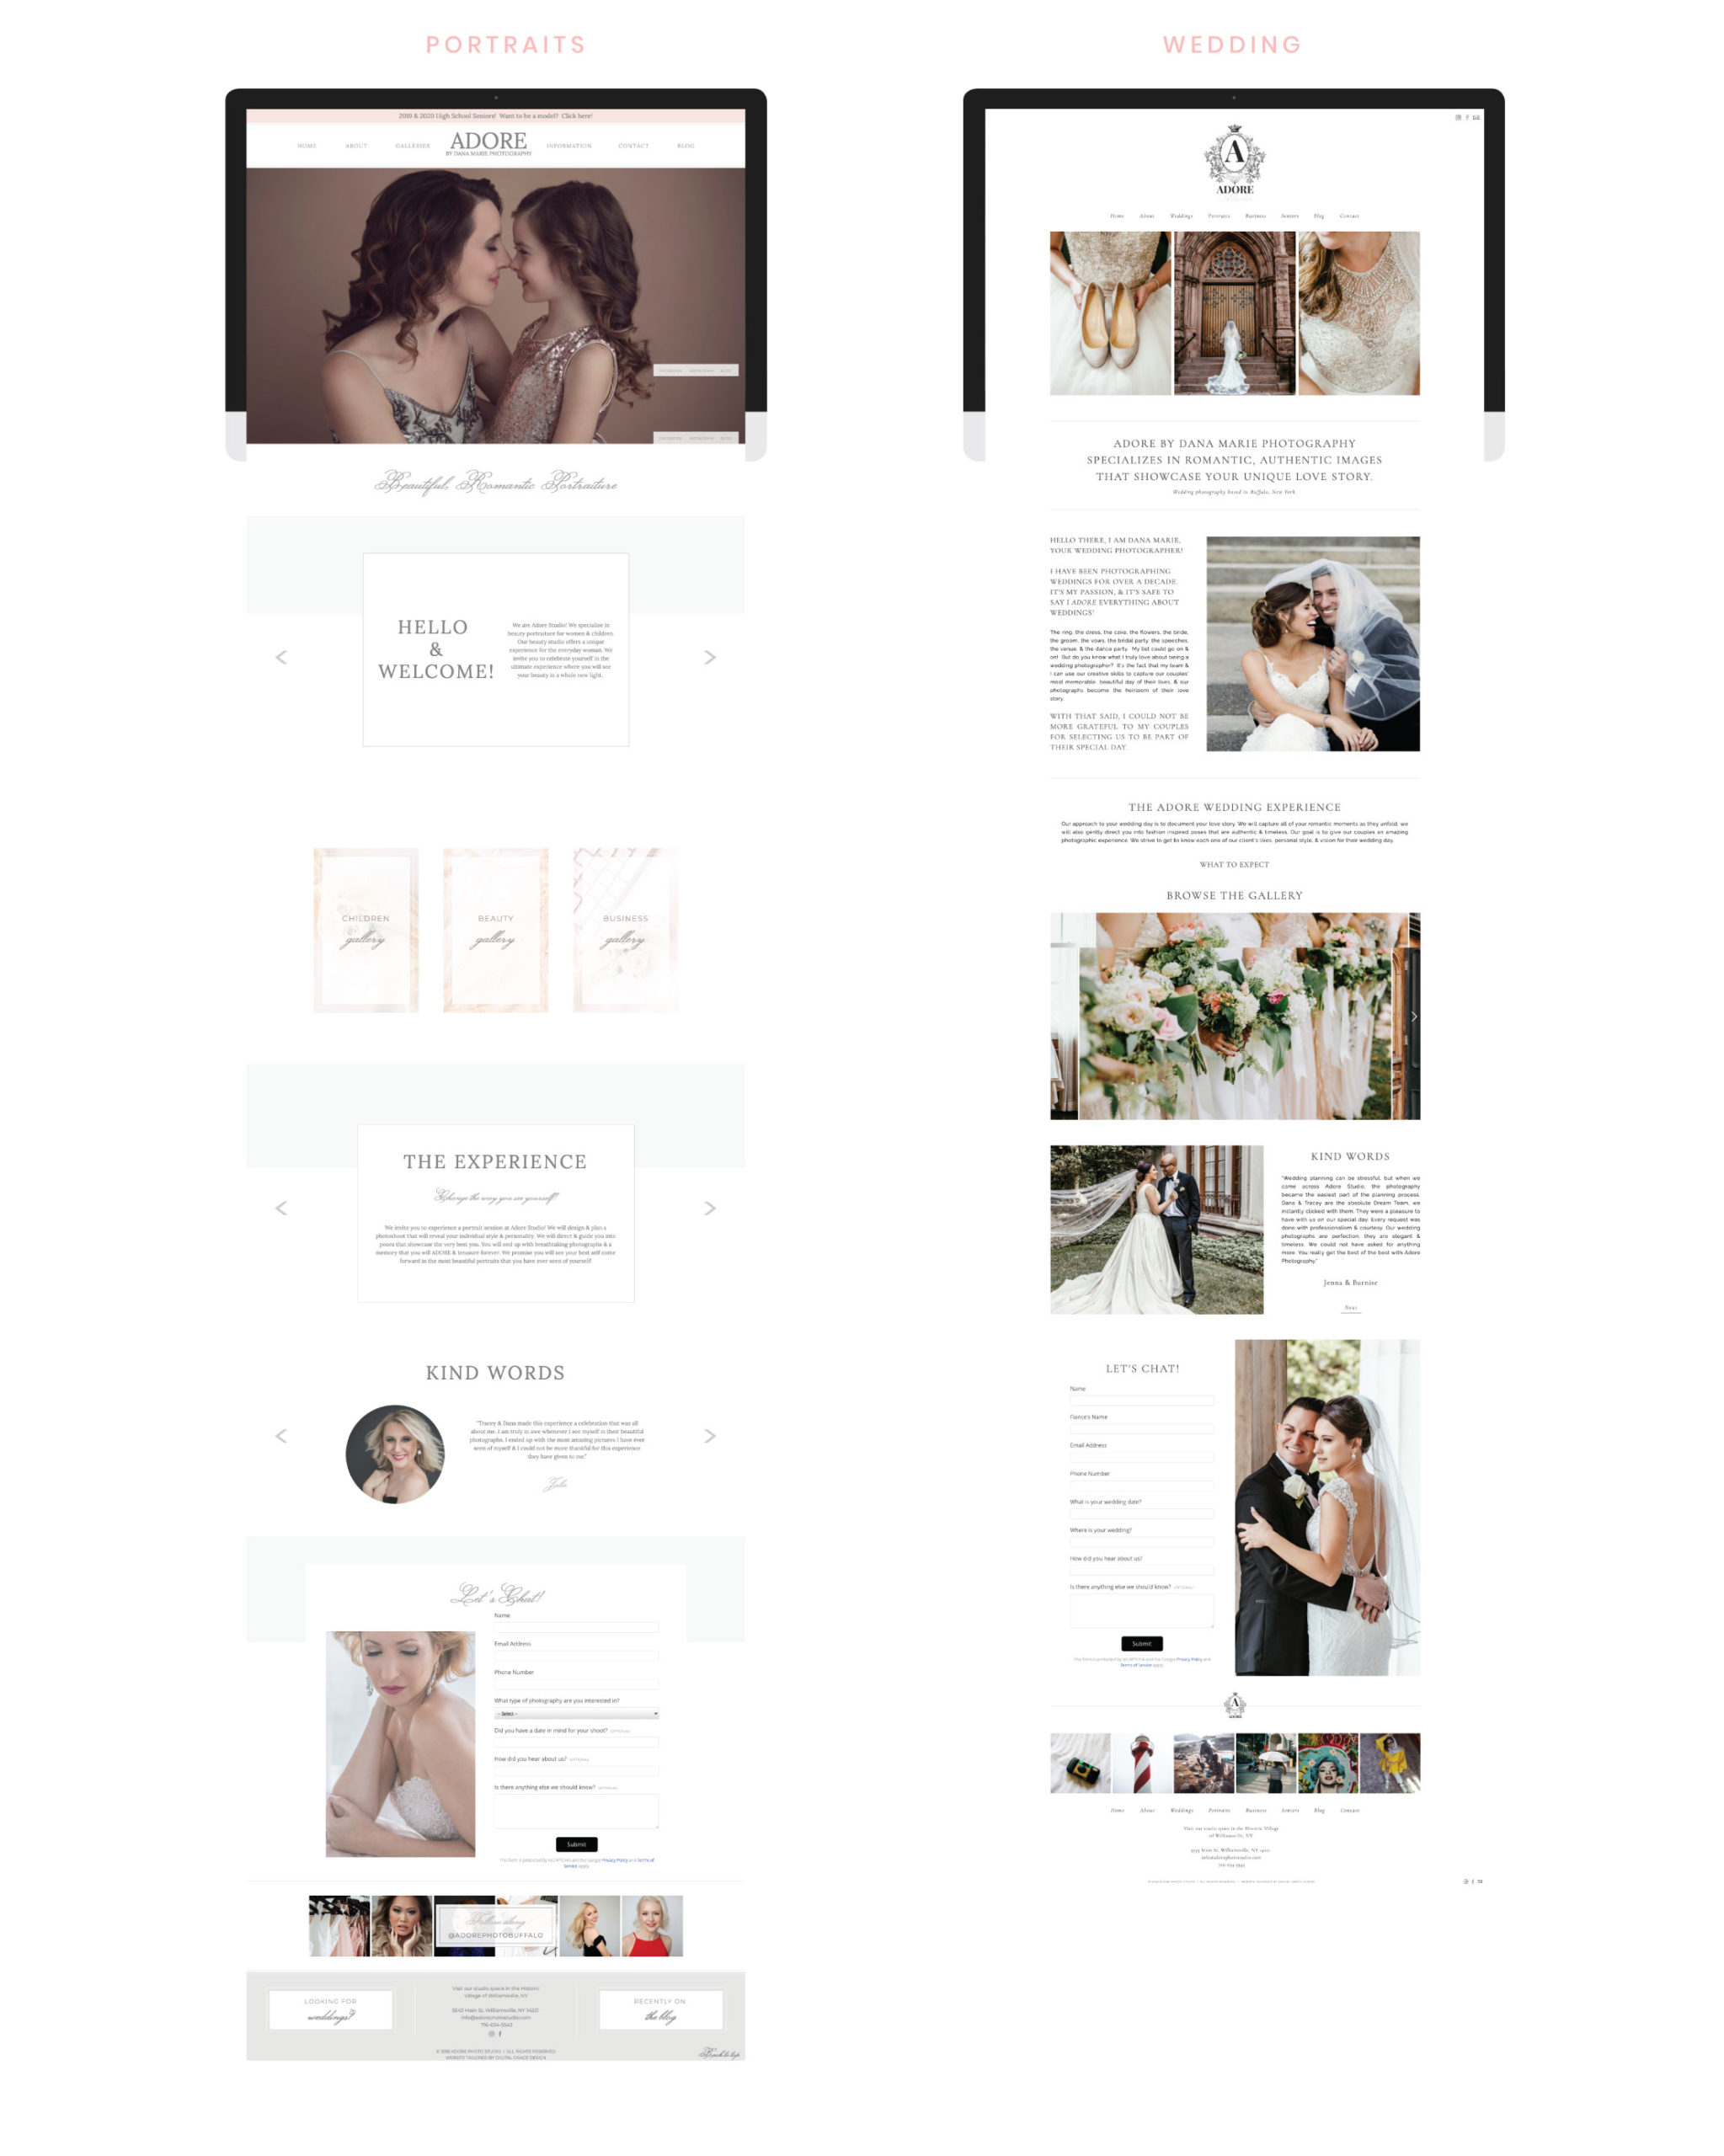 Showit Website Reveal - iMac mockup with Adore Photo Studio's website before including Portraits and wedding page